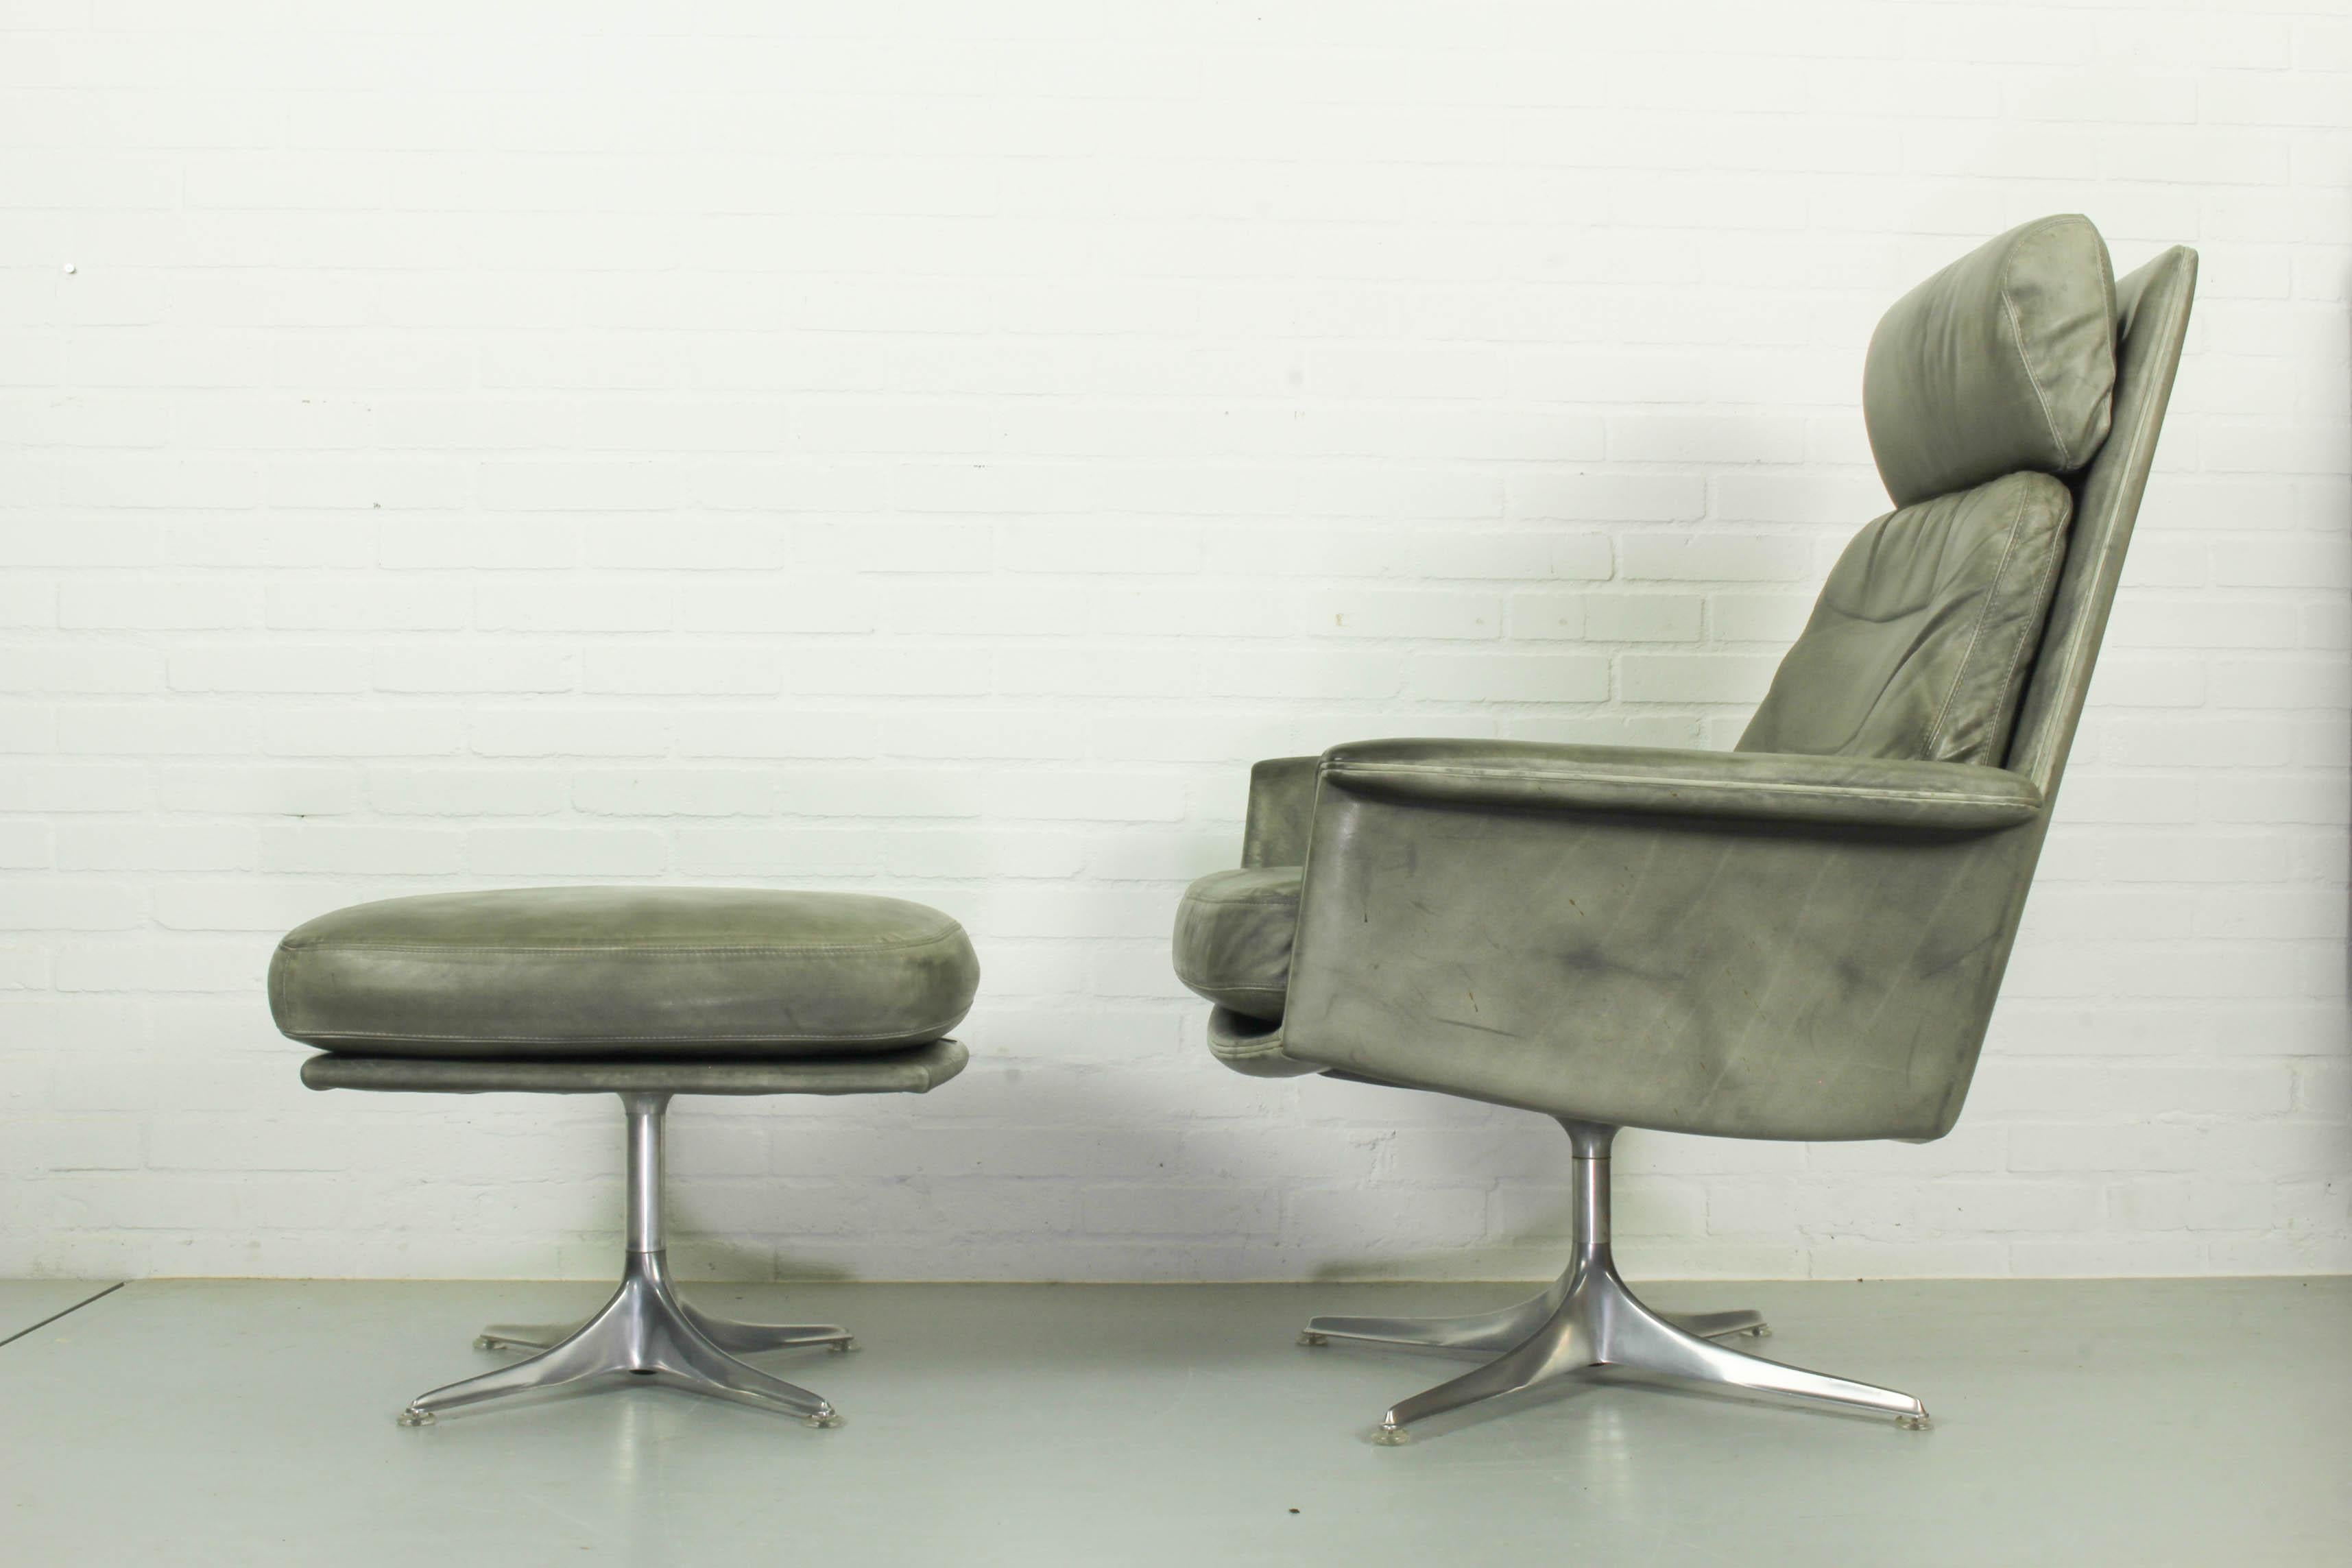 Grey leather Sedia chair with matching ottoman designed by Horst Brüning for COR, Germany in the 1960s. The leather has patina as expected with regard to its age and use, but is in good condition with no cracks, holes. Material: leather, aluminium.